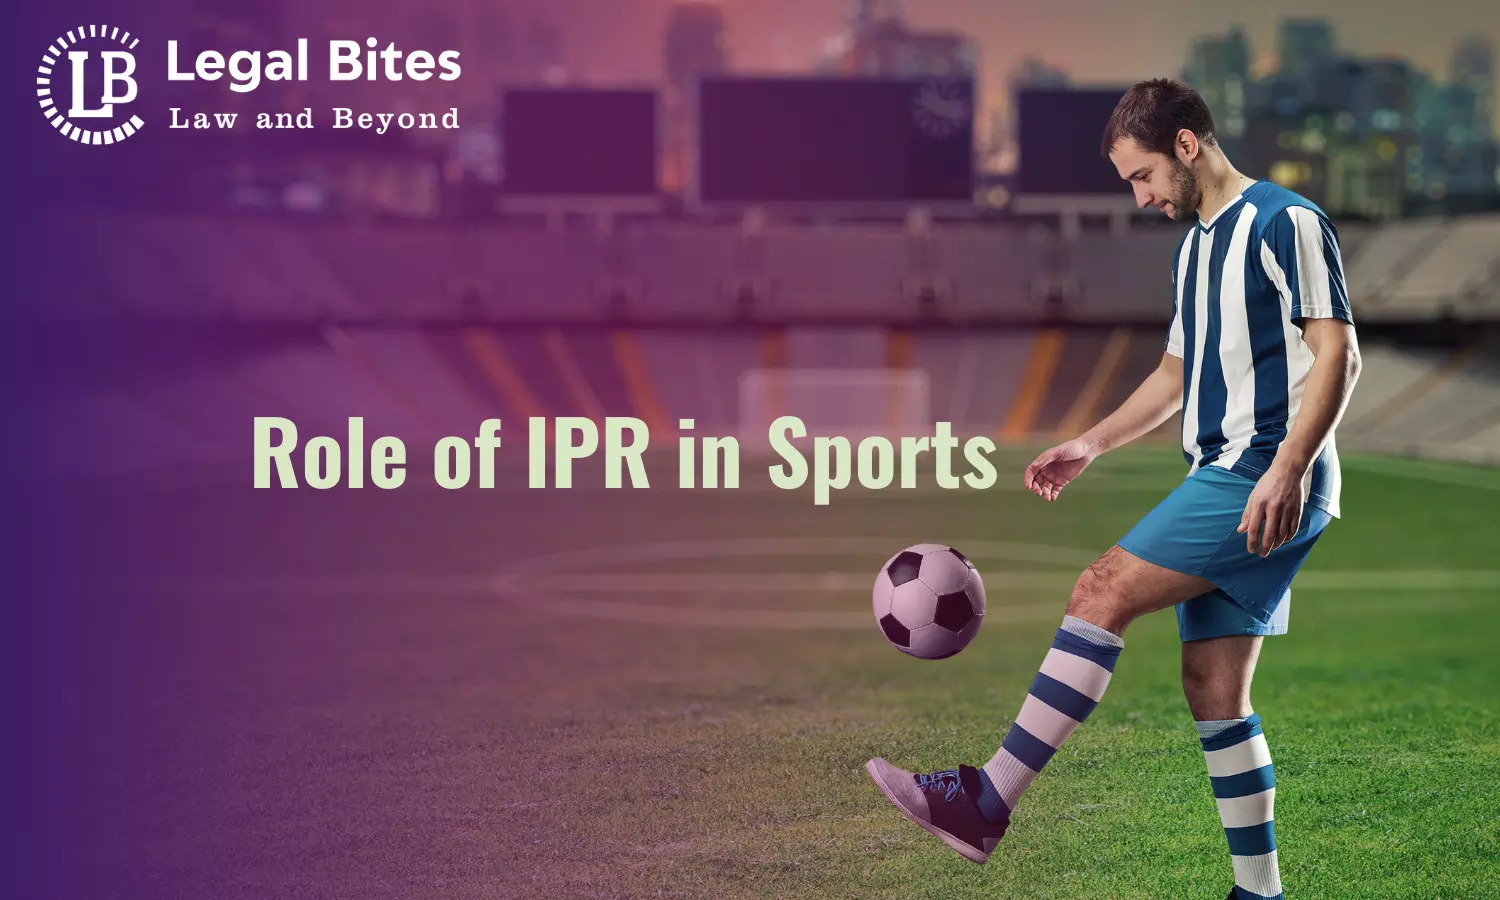 Role of IPR in Sports